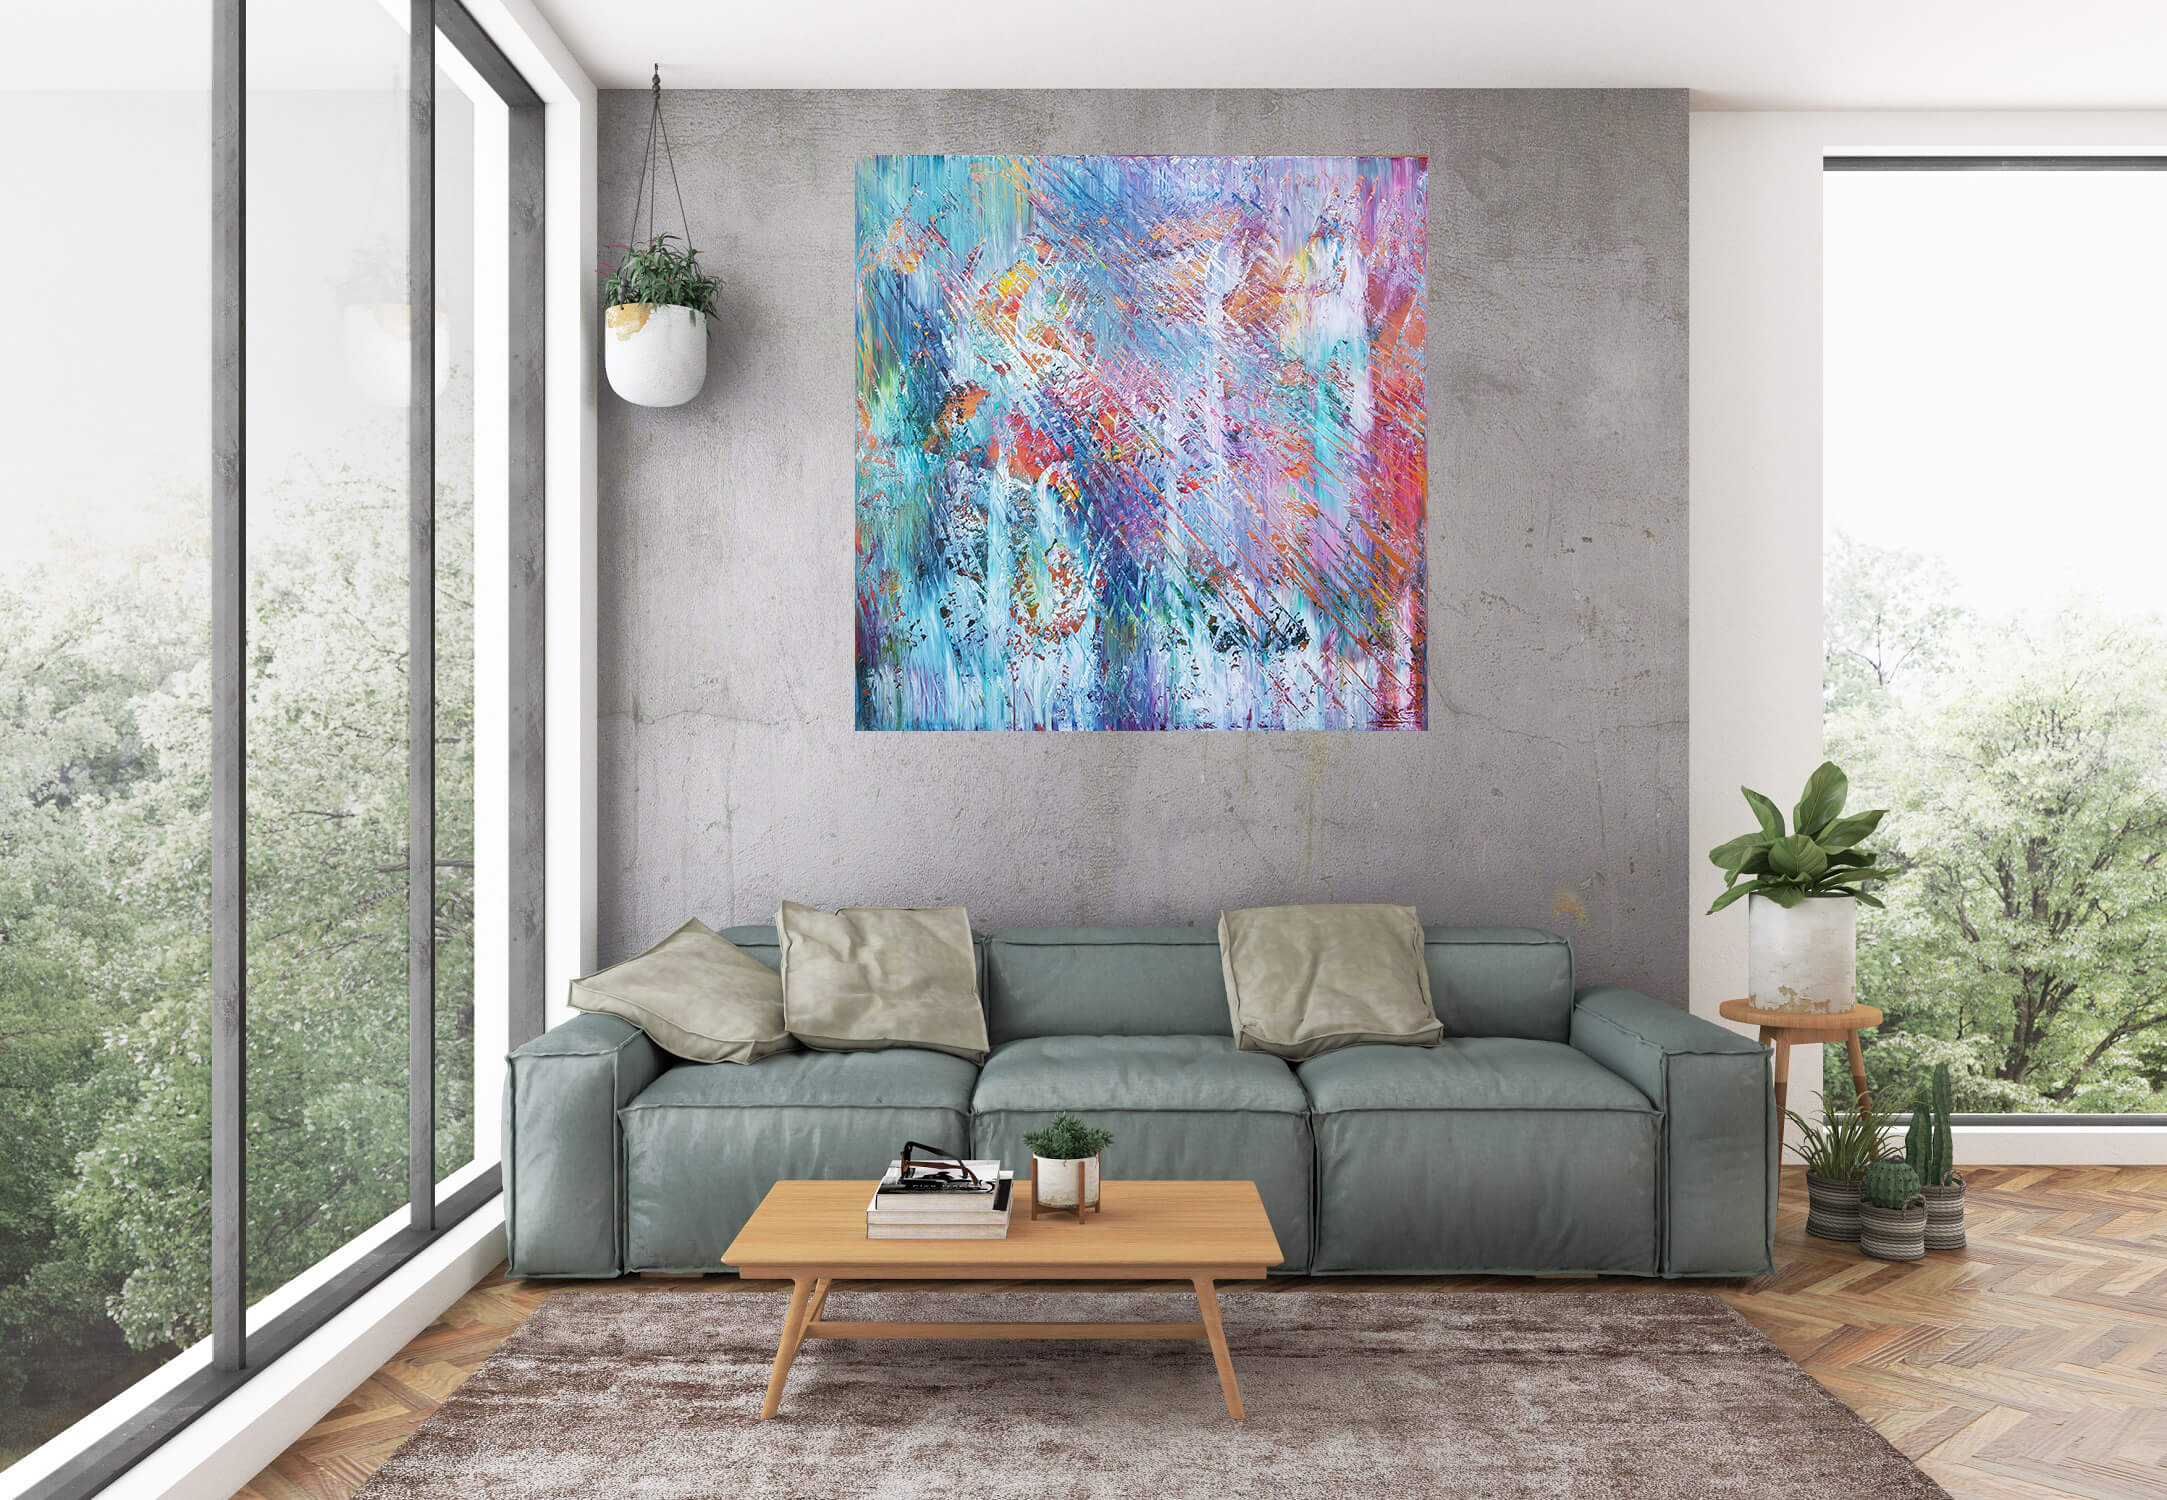 Fragments of joy - XL colorful abstract painting - Ivana Olbricht